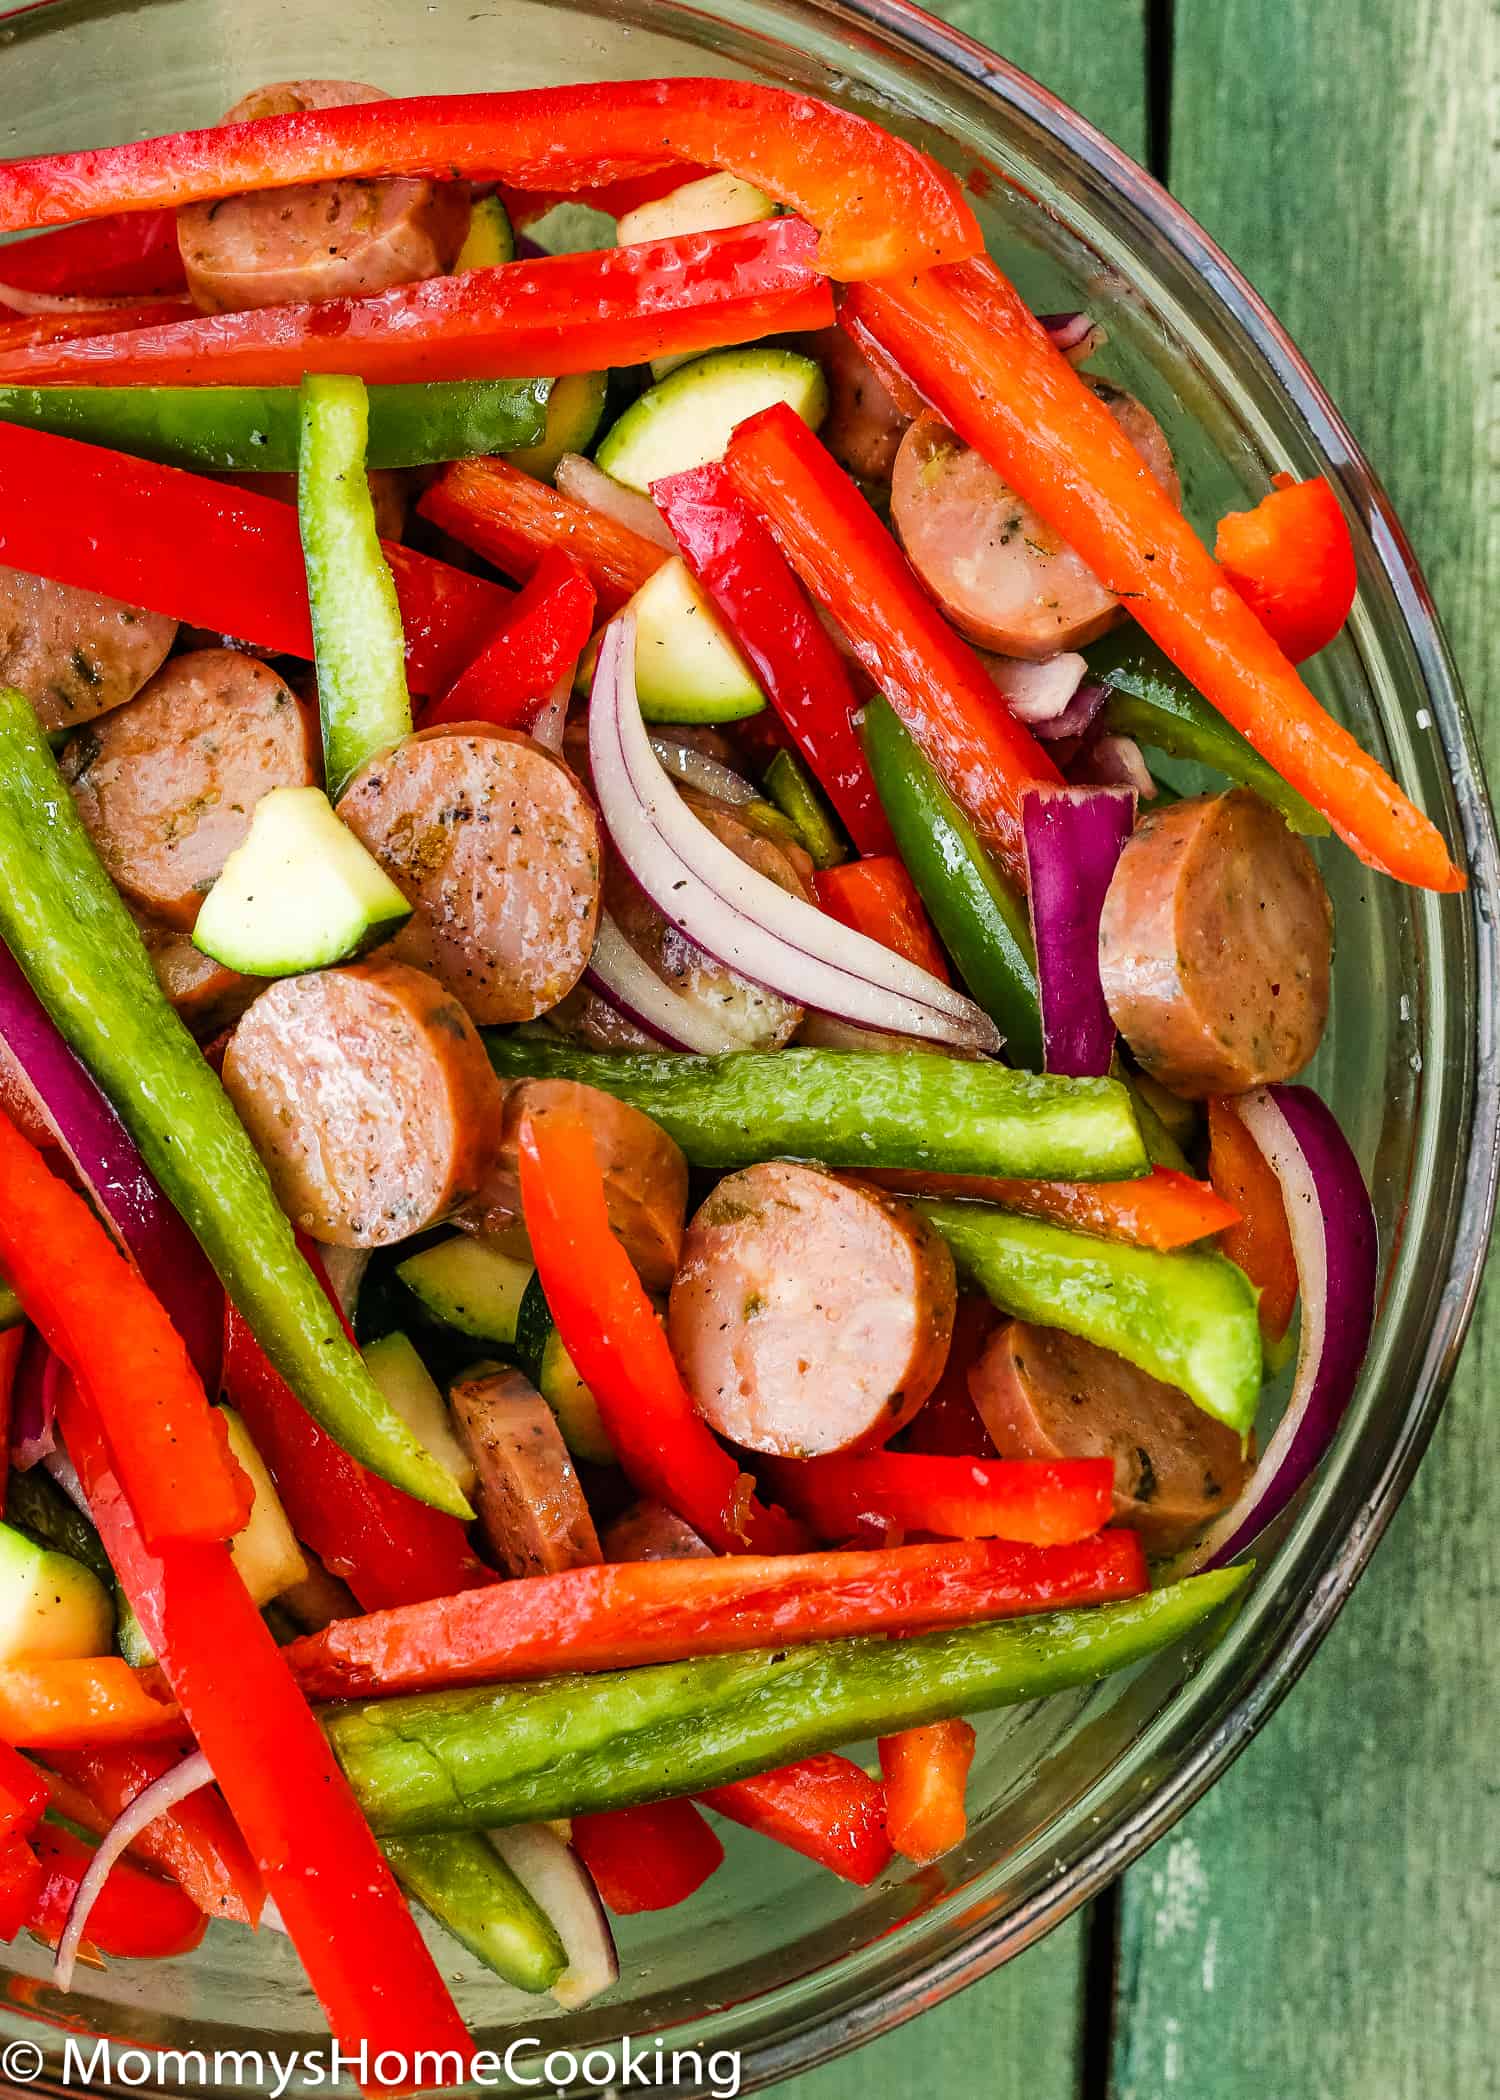 sliced sausages and veggies in a bowl